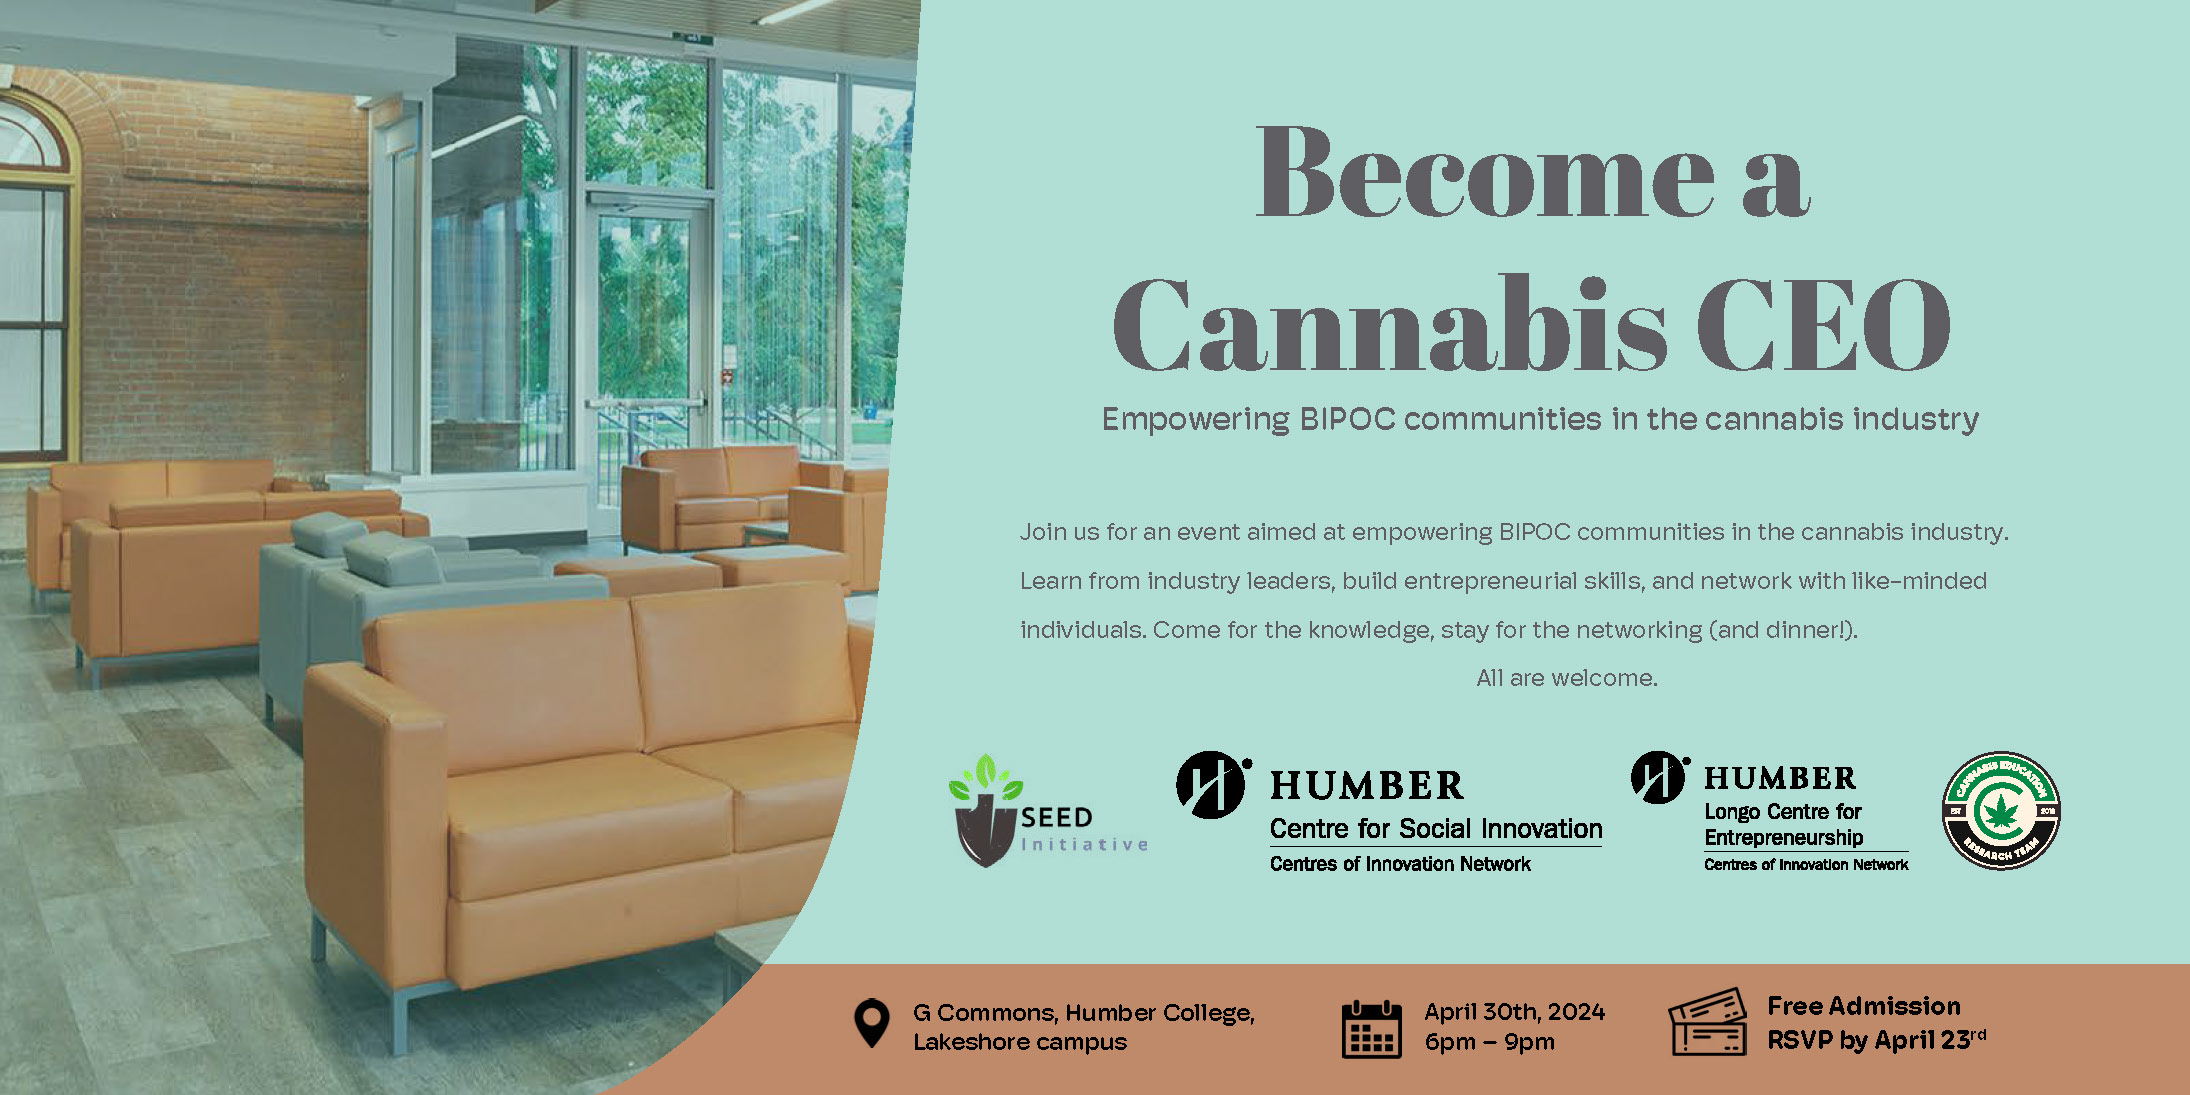 An image listing the information for the Become a Cannabis CEO event